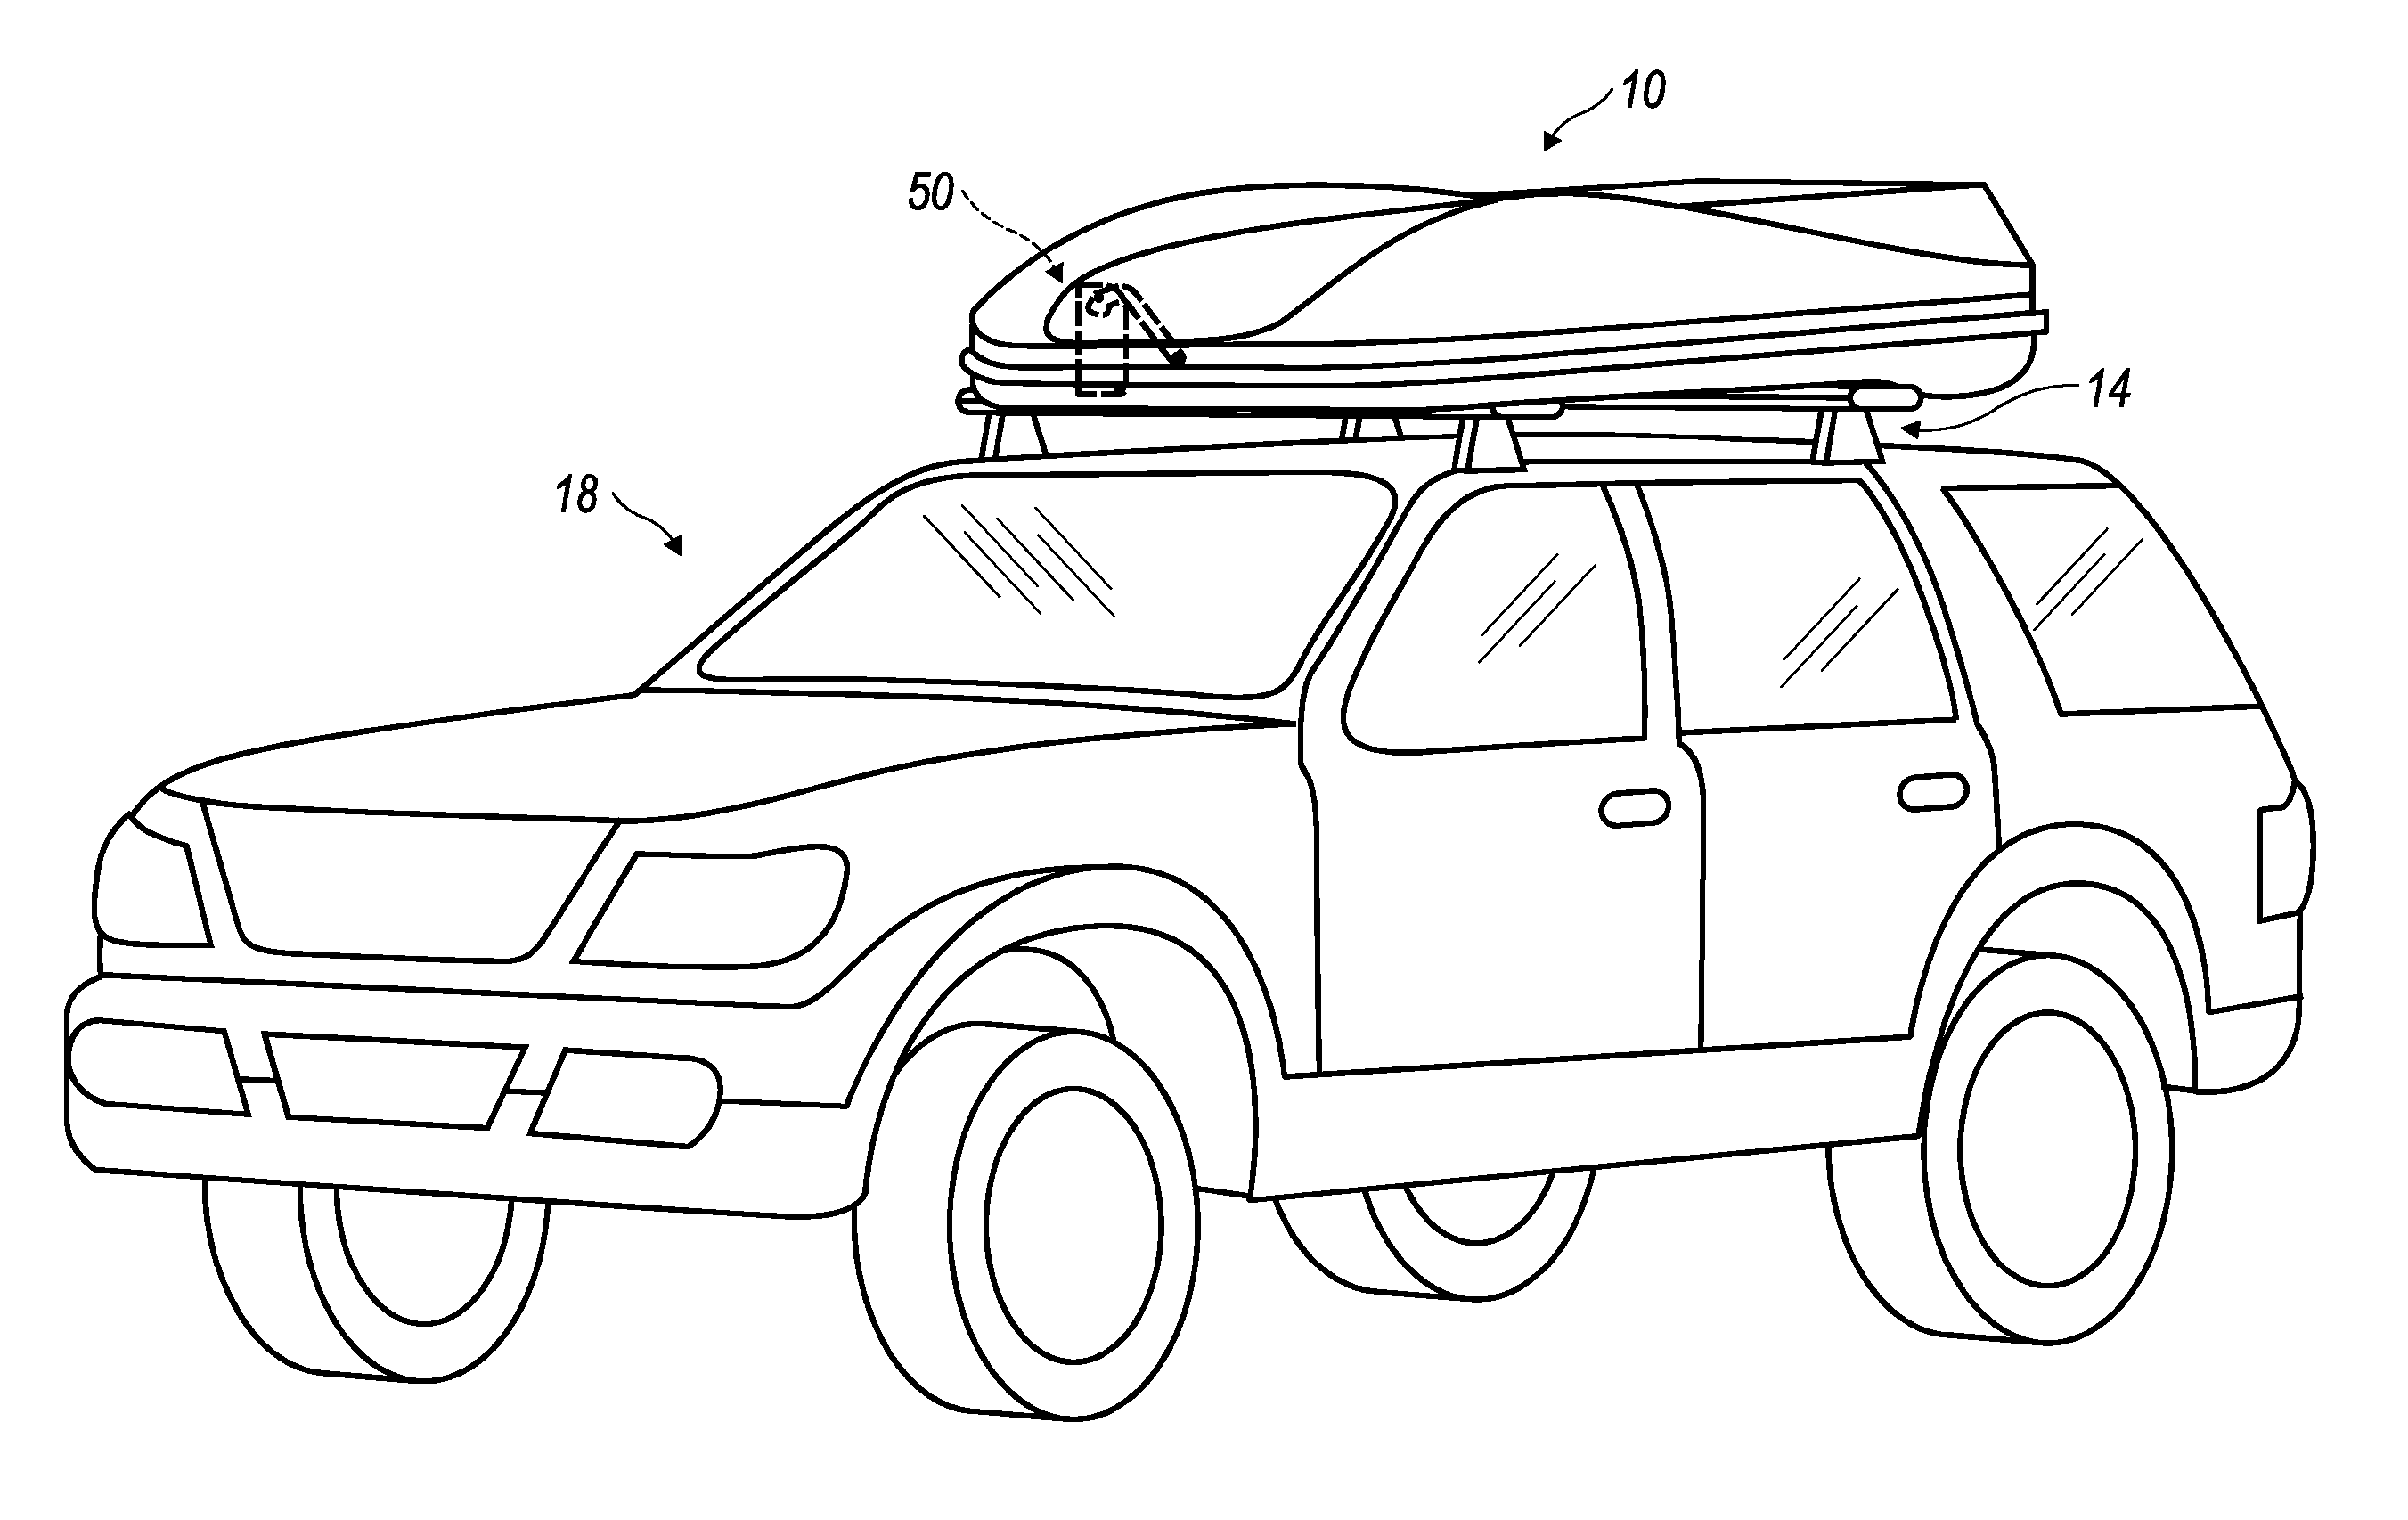 Single force strut for dual sided cargo box